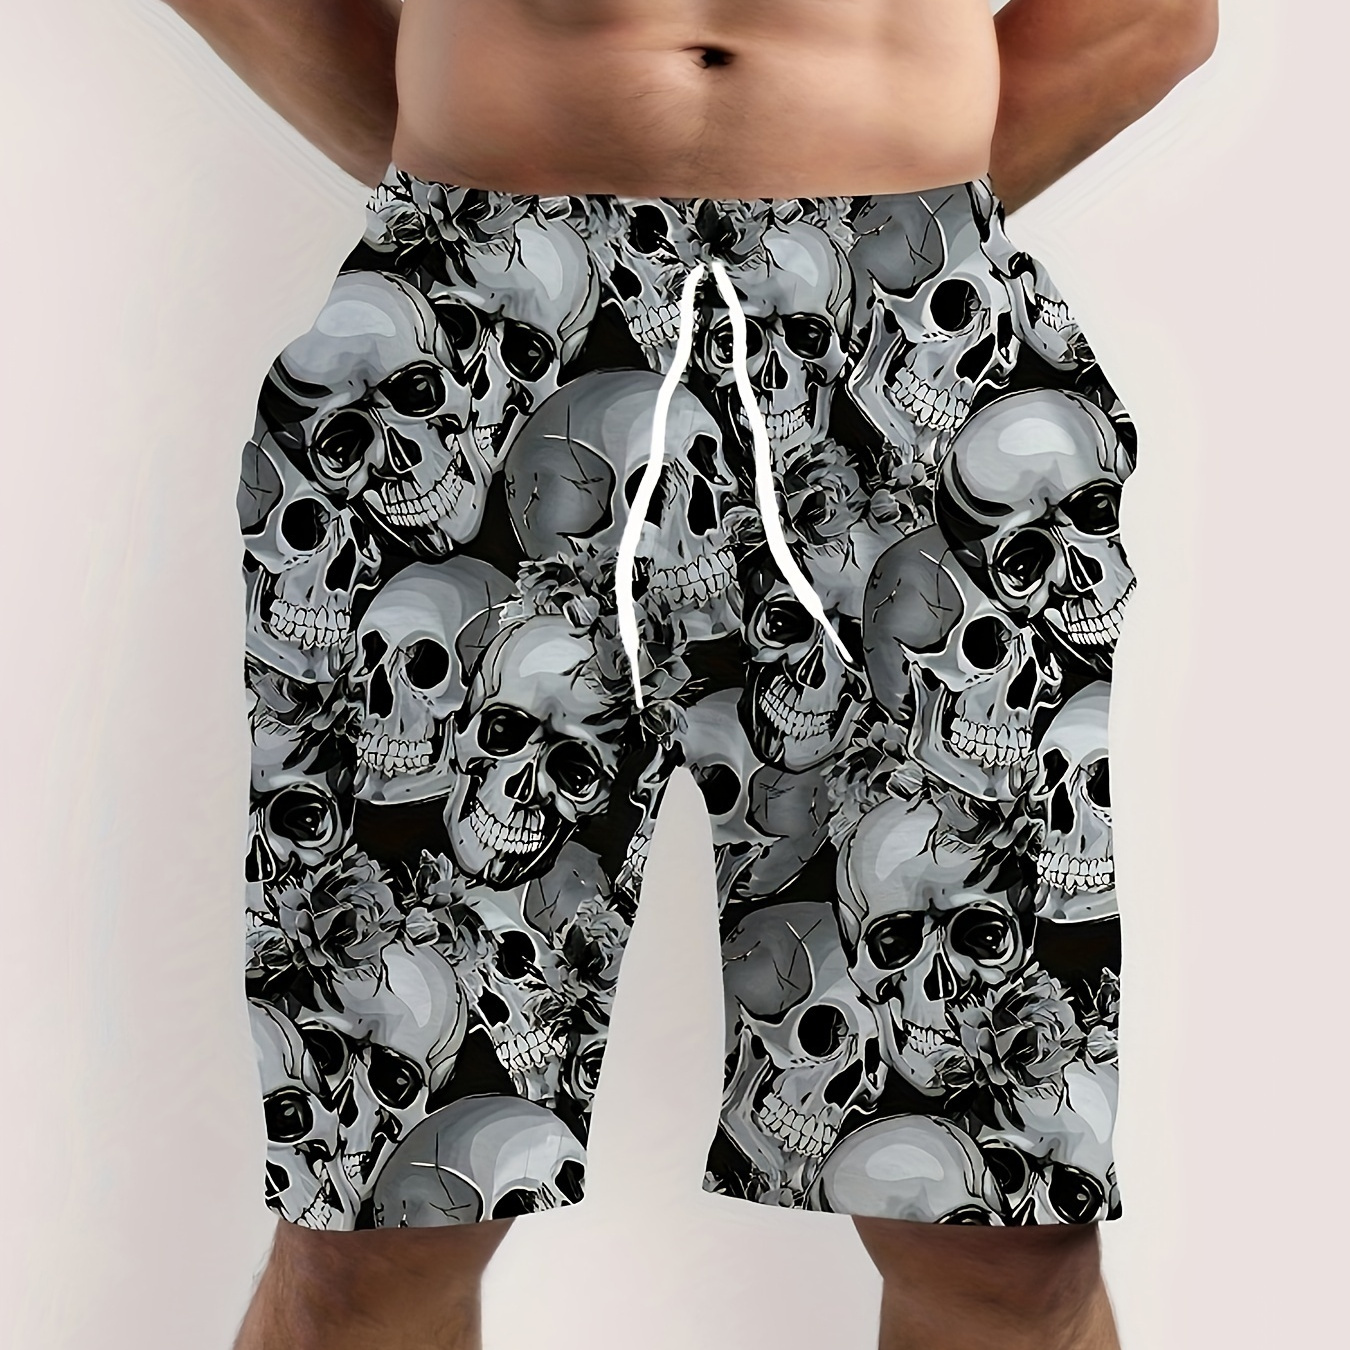 

3d Digital Skeleton Skull Pattern Board Shorts With Drawstring And Pockets, Novel And Stylish Shorts For Men's Summer Street And Beach Wear